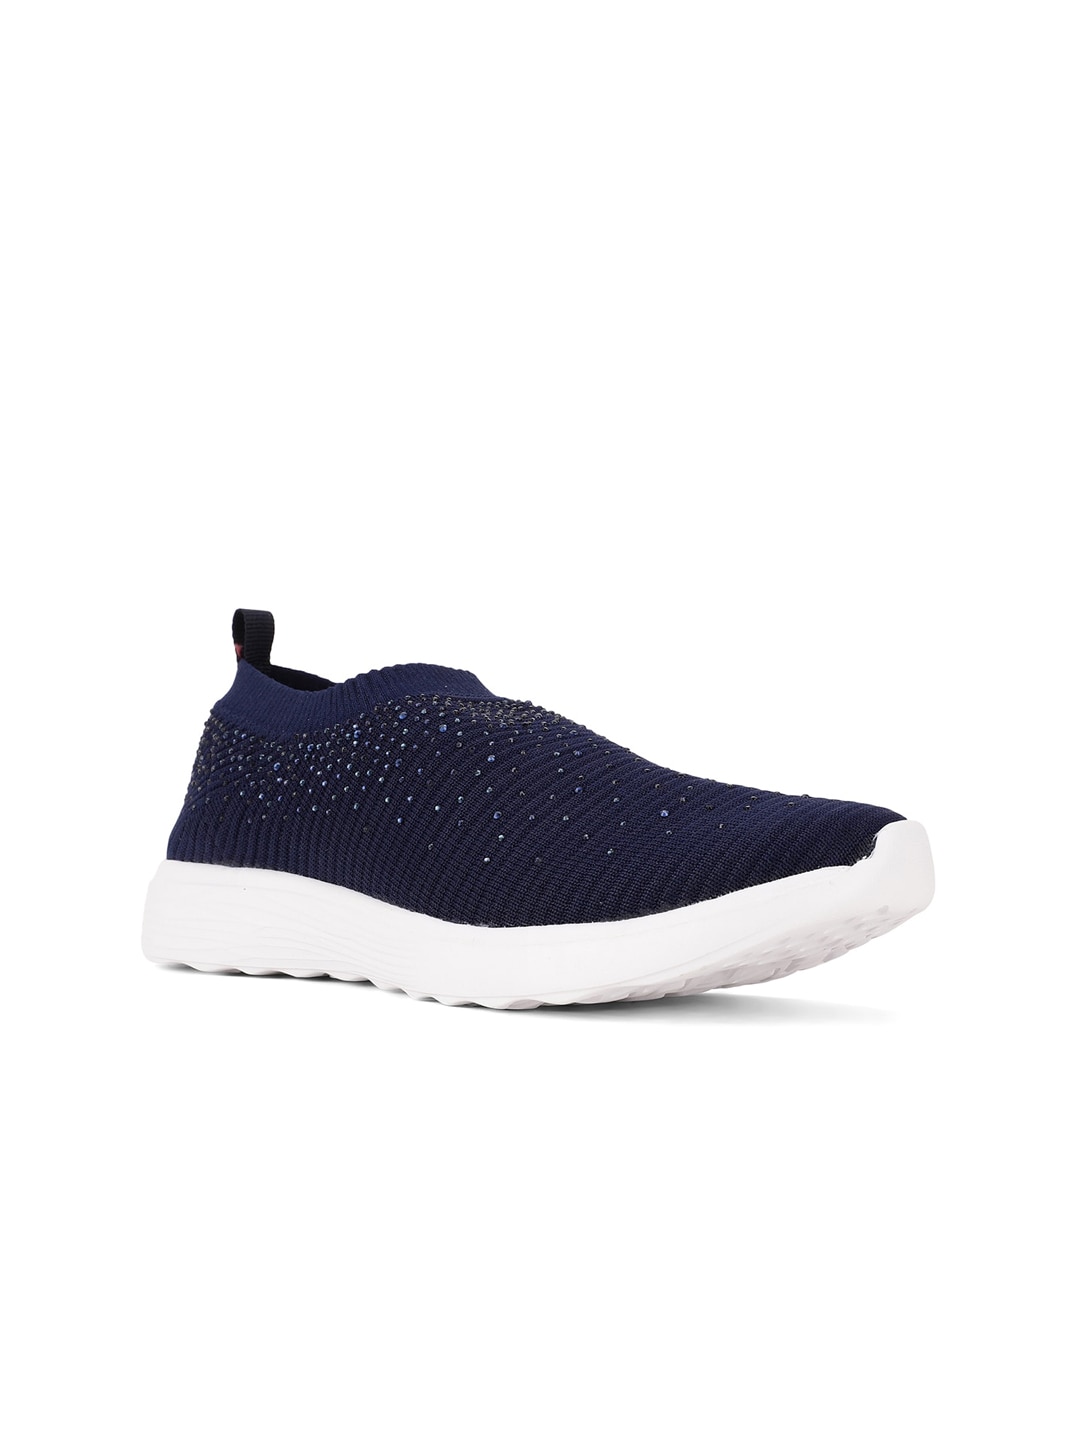 North Star Women Blue Woven Design PU Slip-On Sneakers Price in India